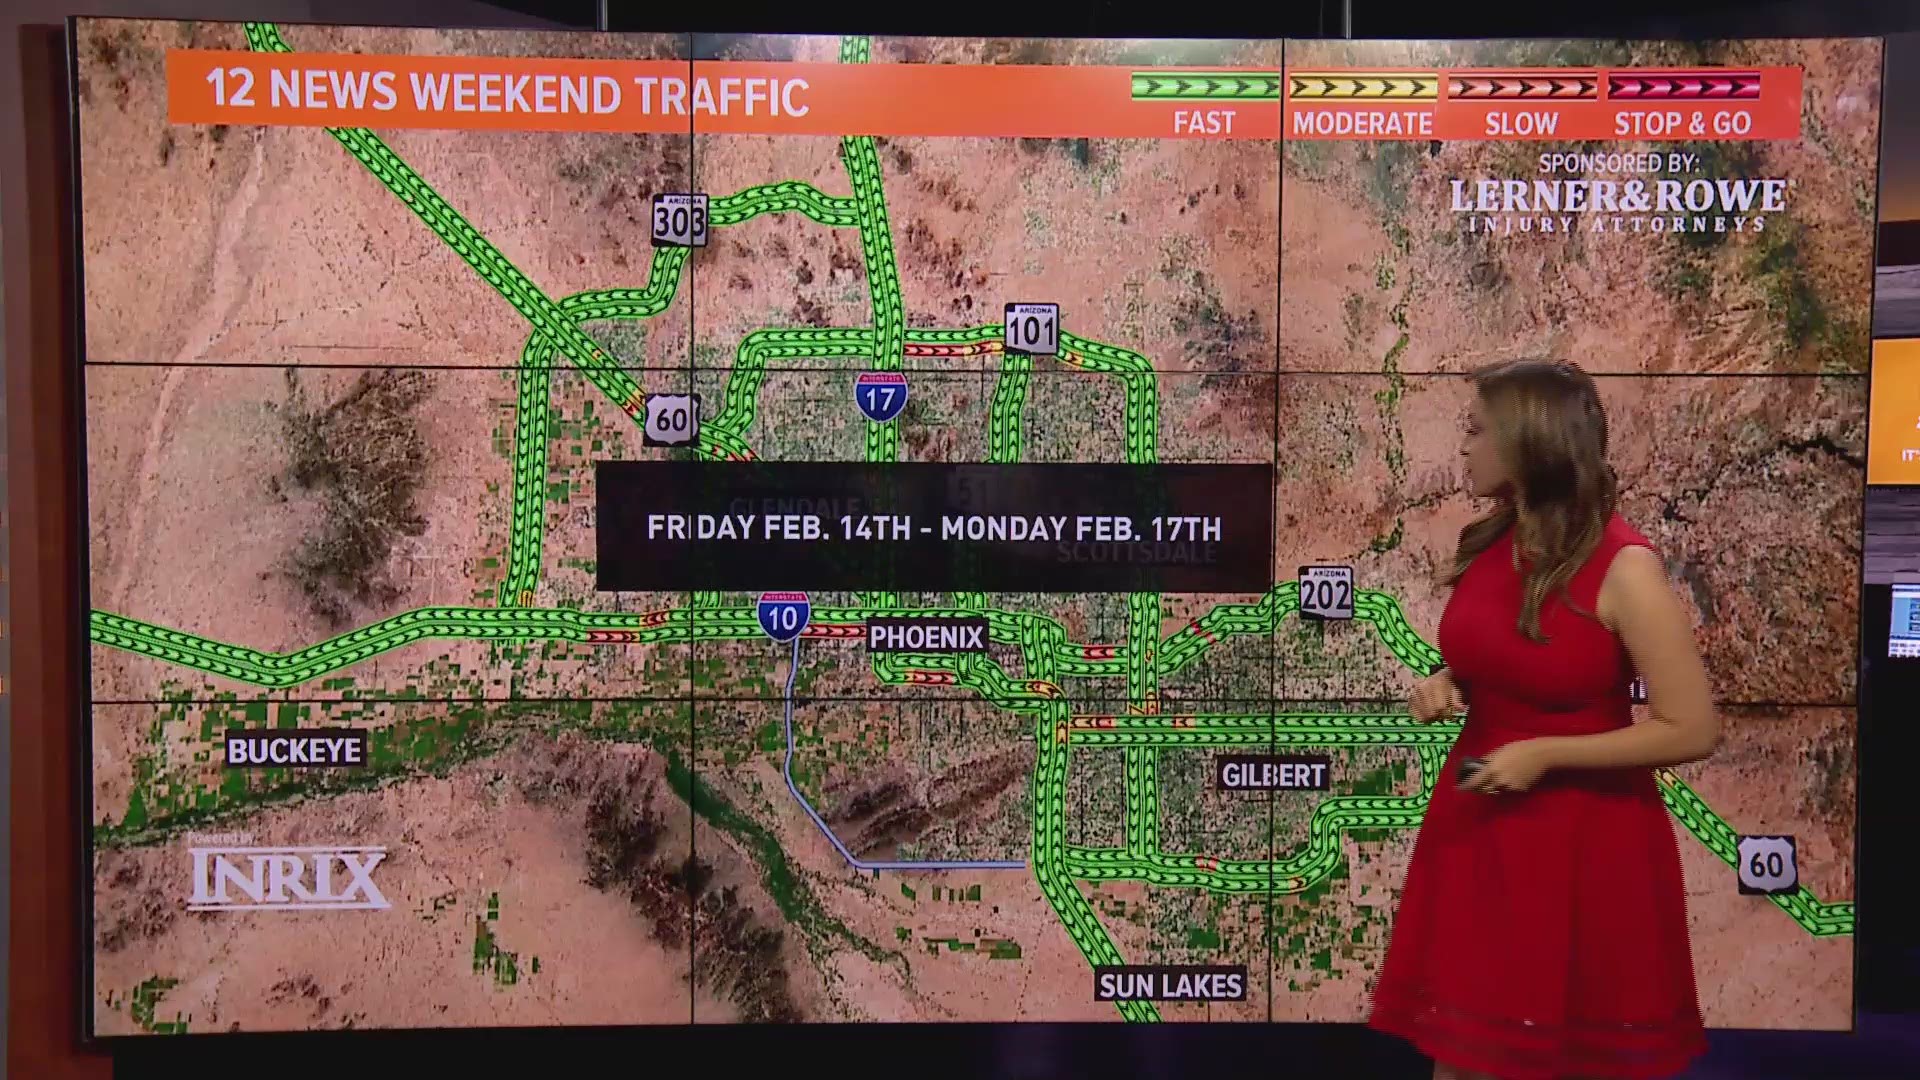 Vanessa Ramirez has everything you need to know about the traffic closures and detours for the weekend of Feb. 14.